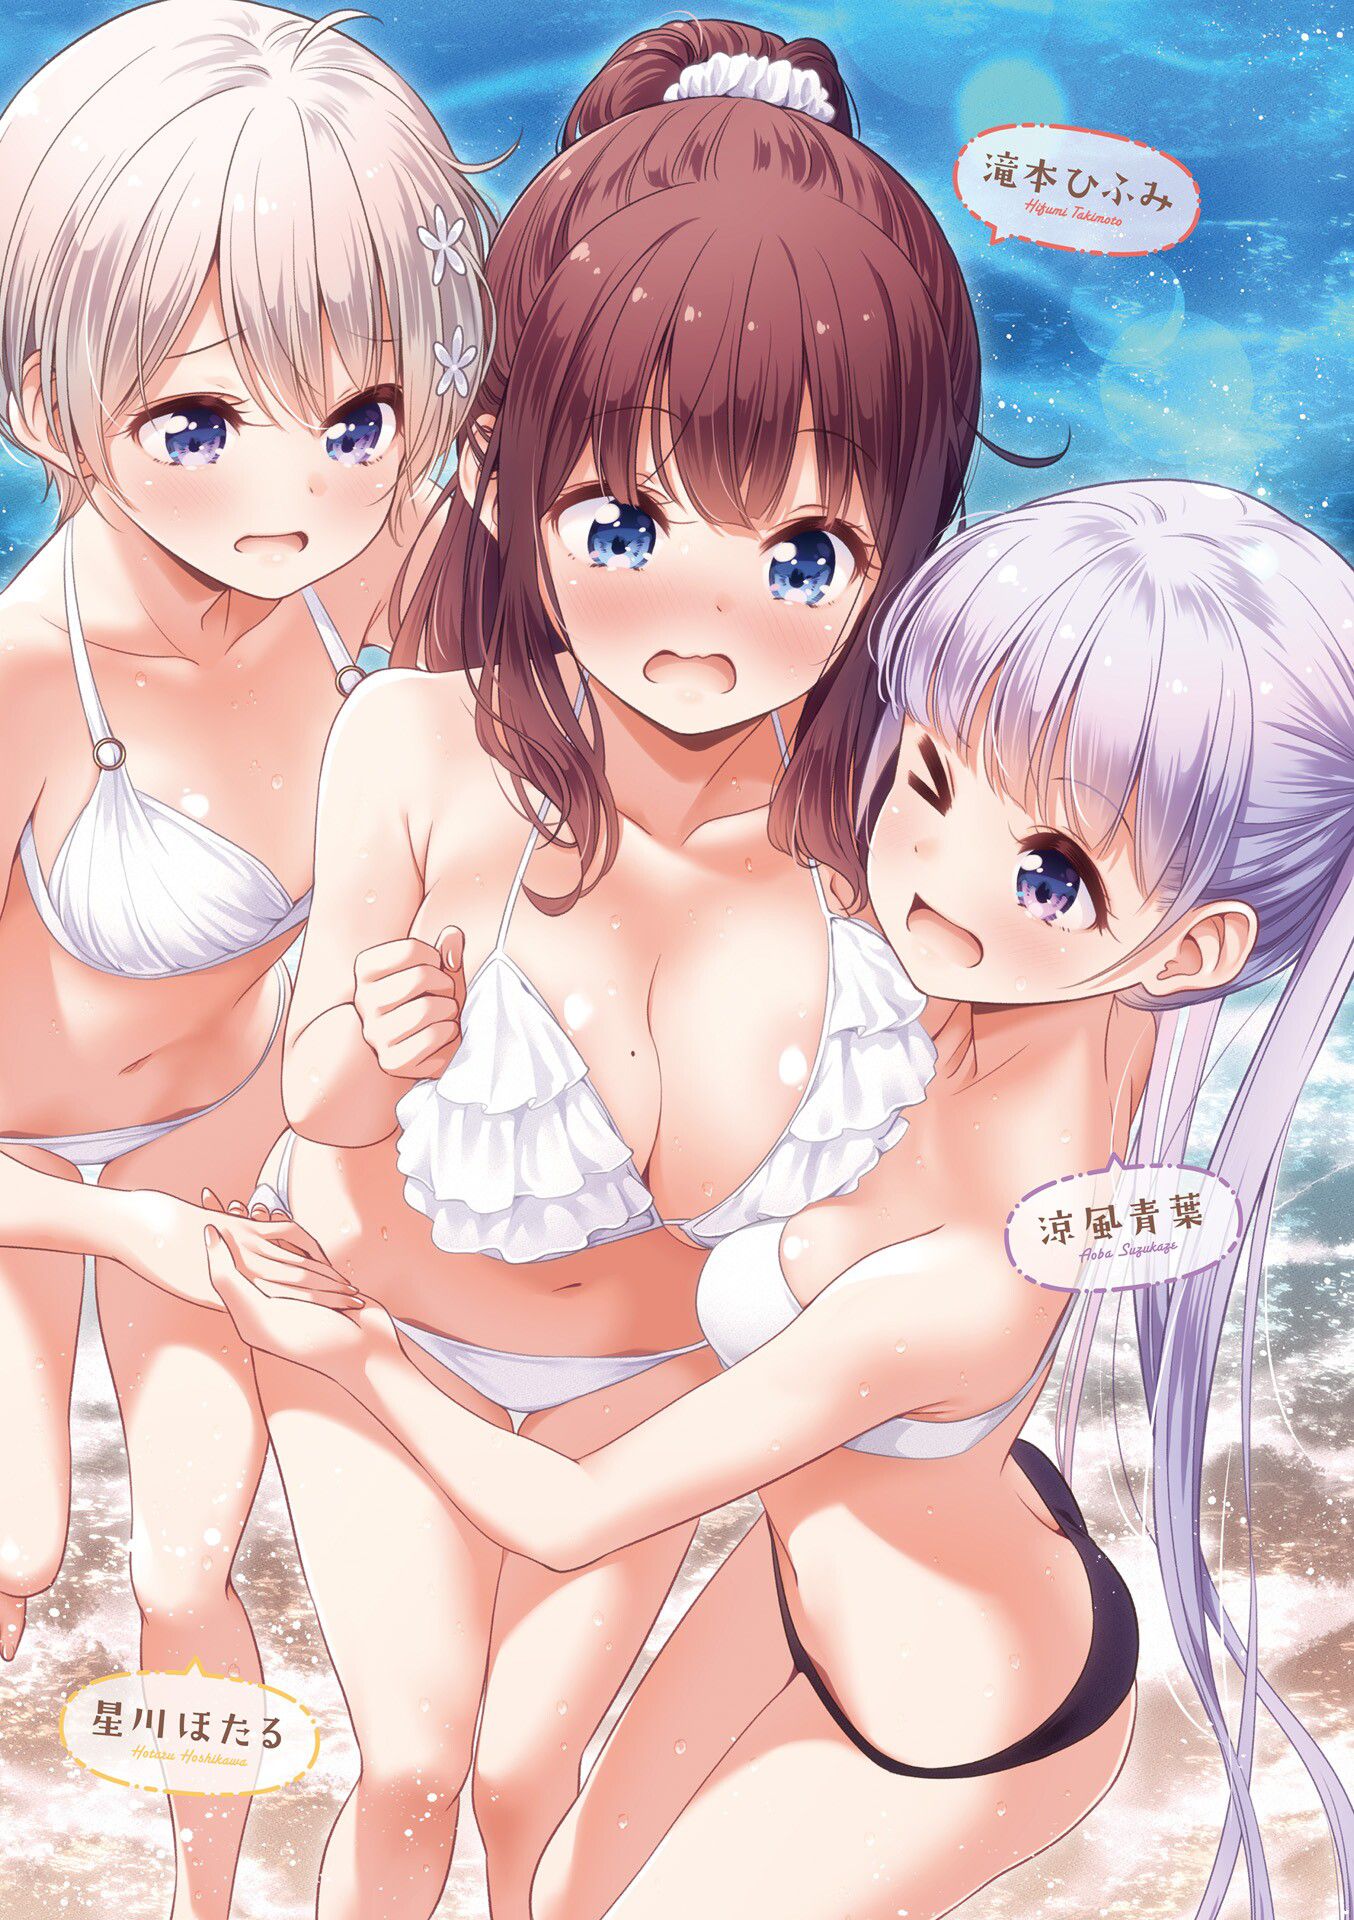 [With image] New GAME's most naughty character, determined www www 6